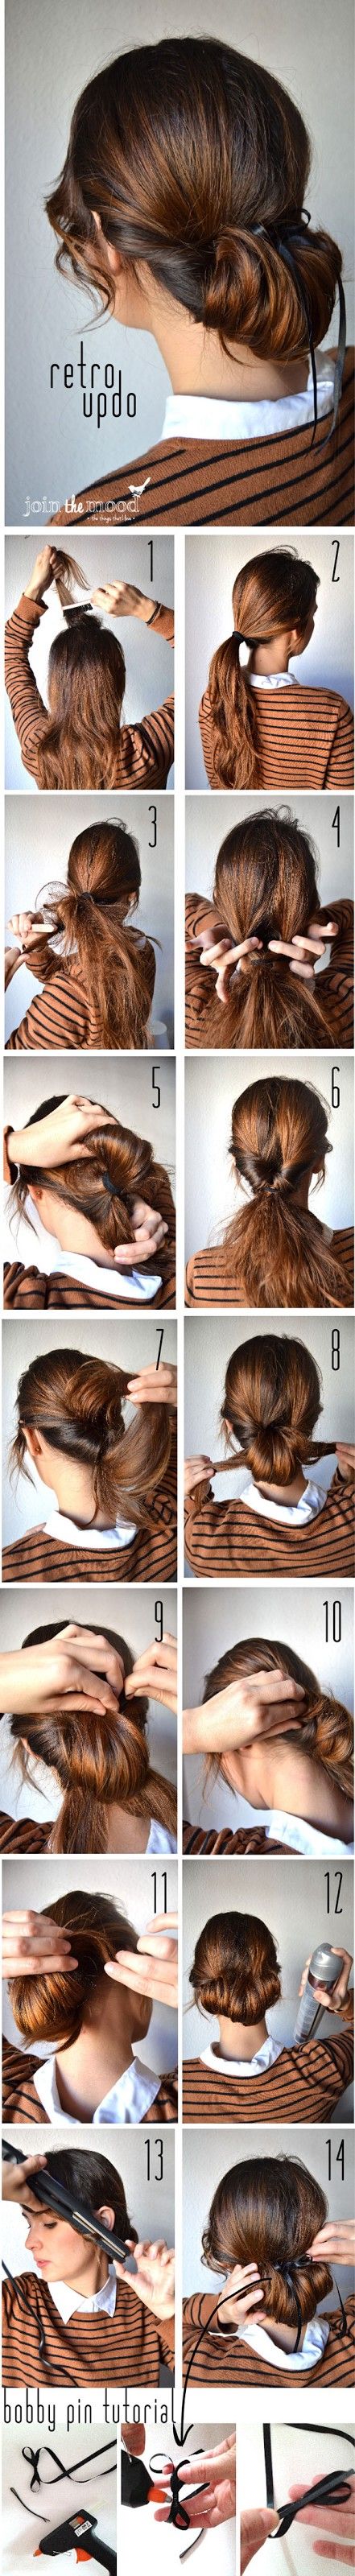 updo-hair-style-9